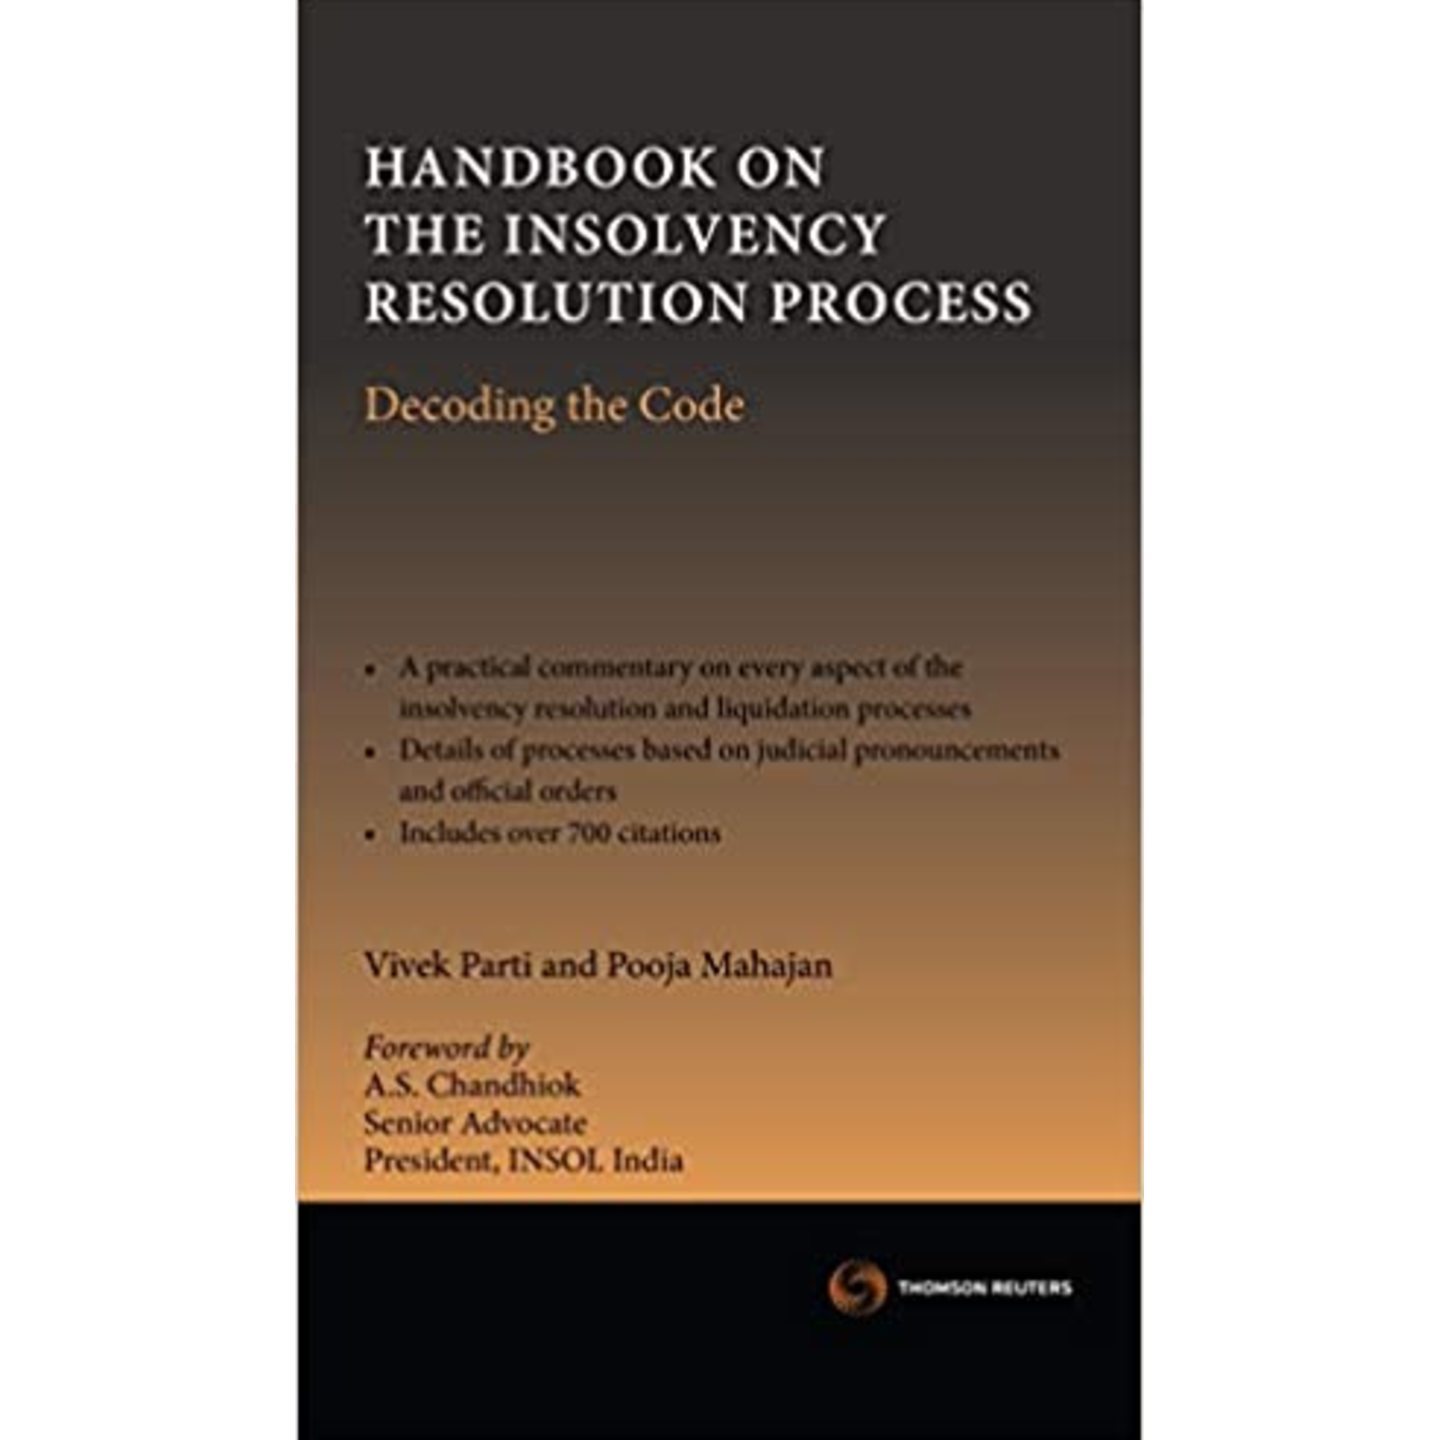 Handbook on the Insolvency Resolution Process